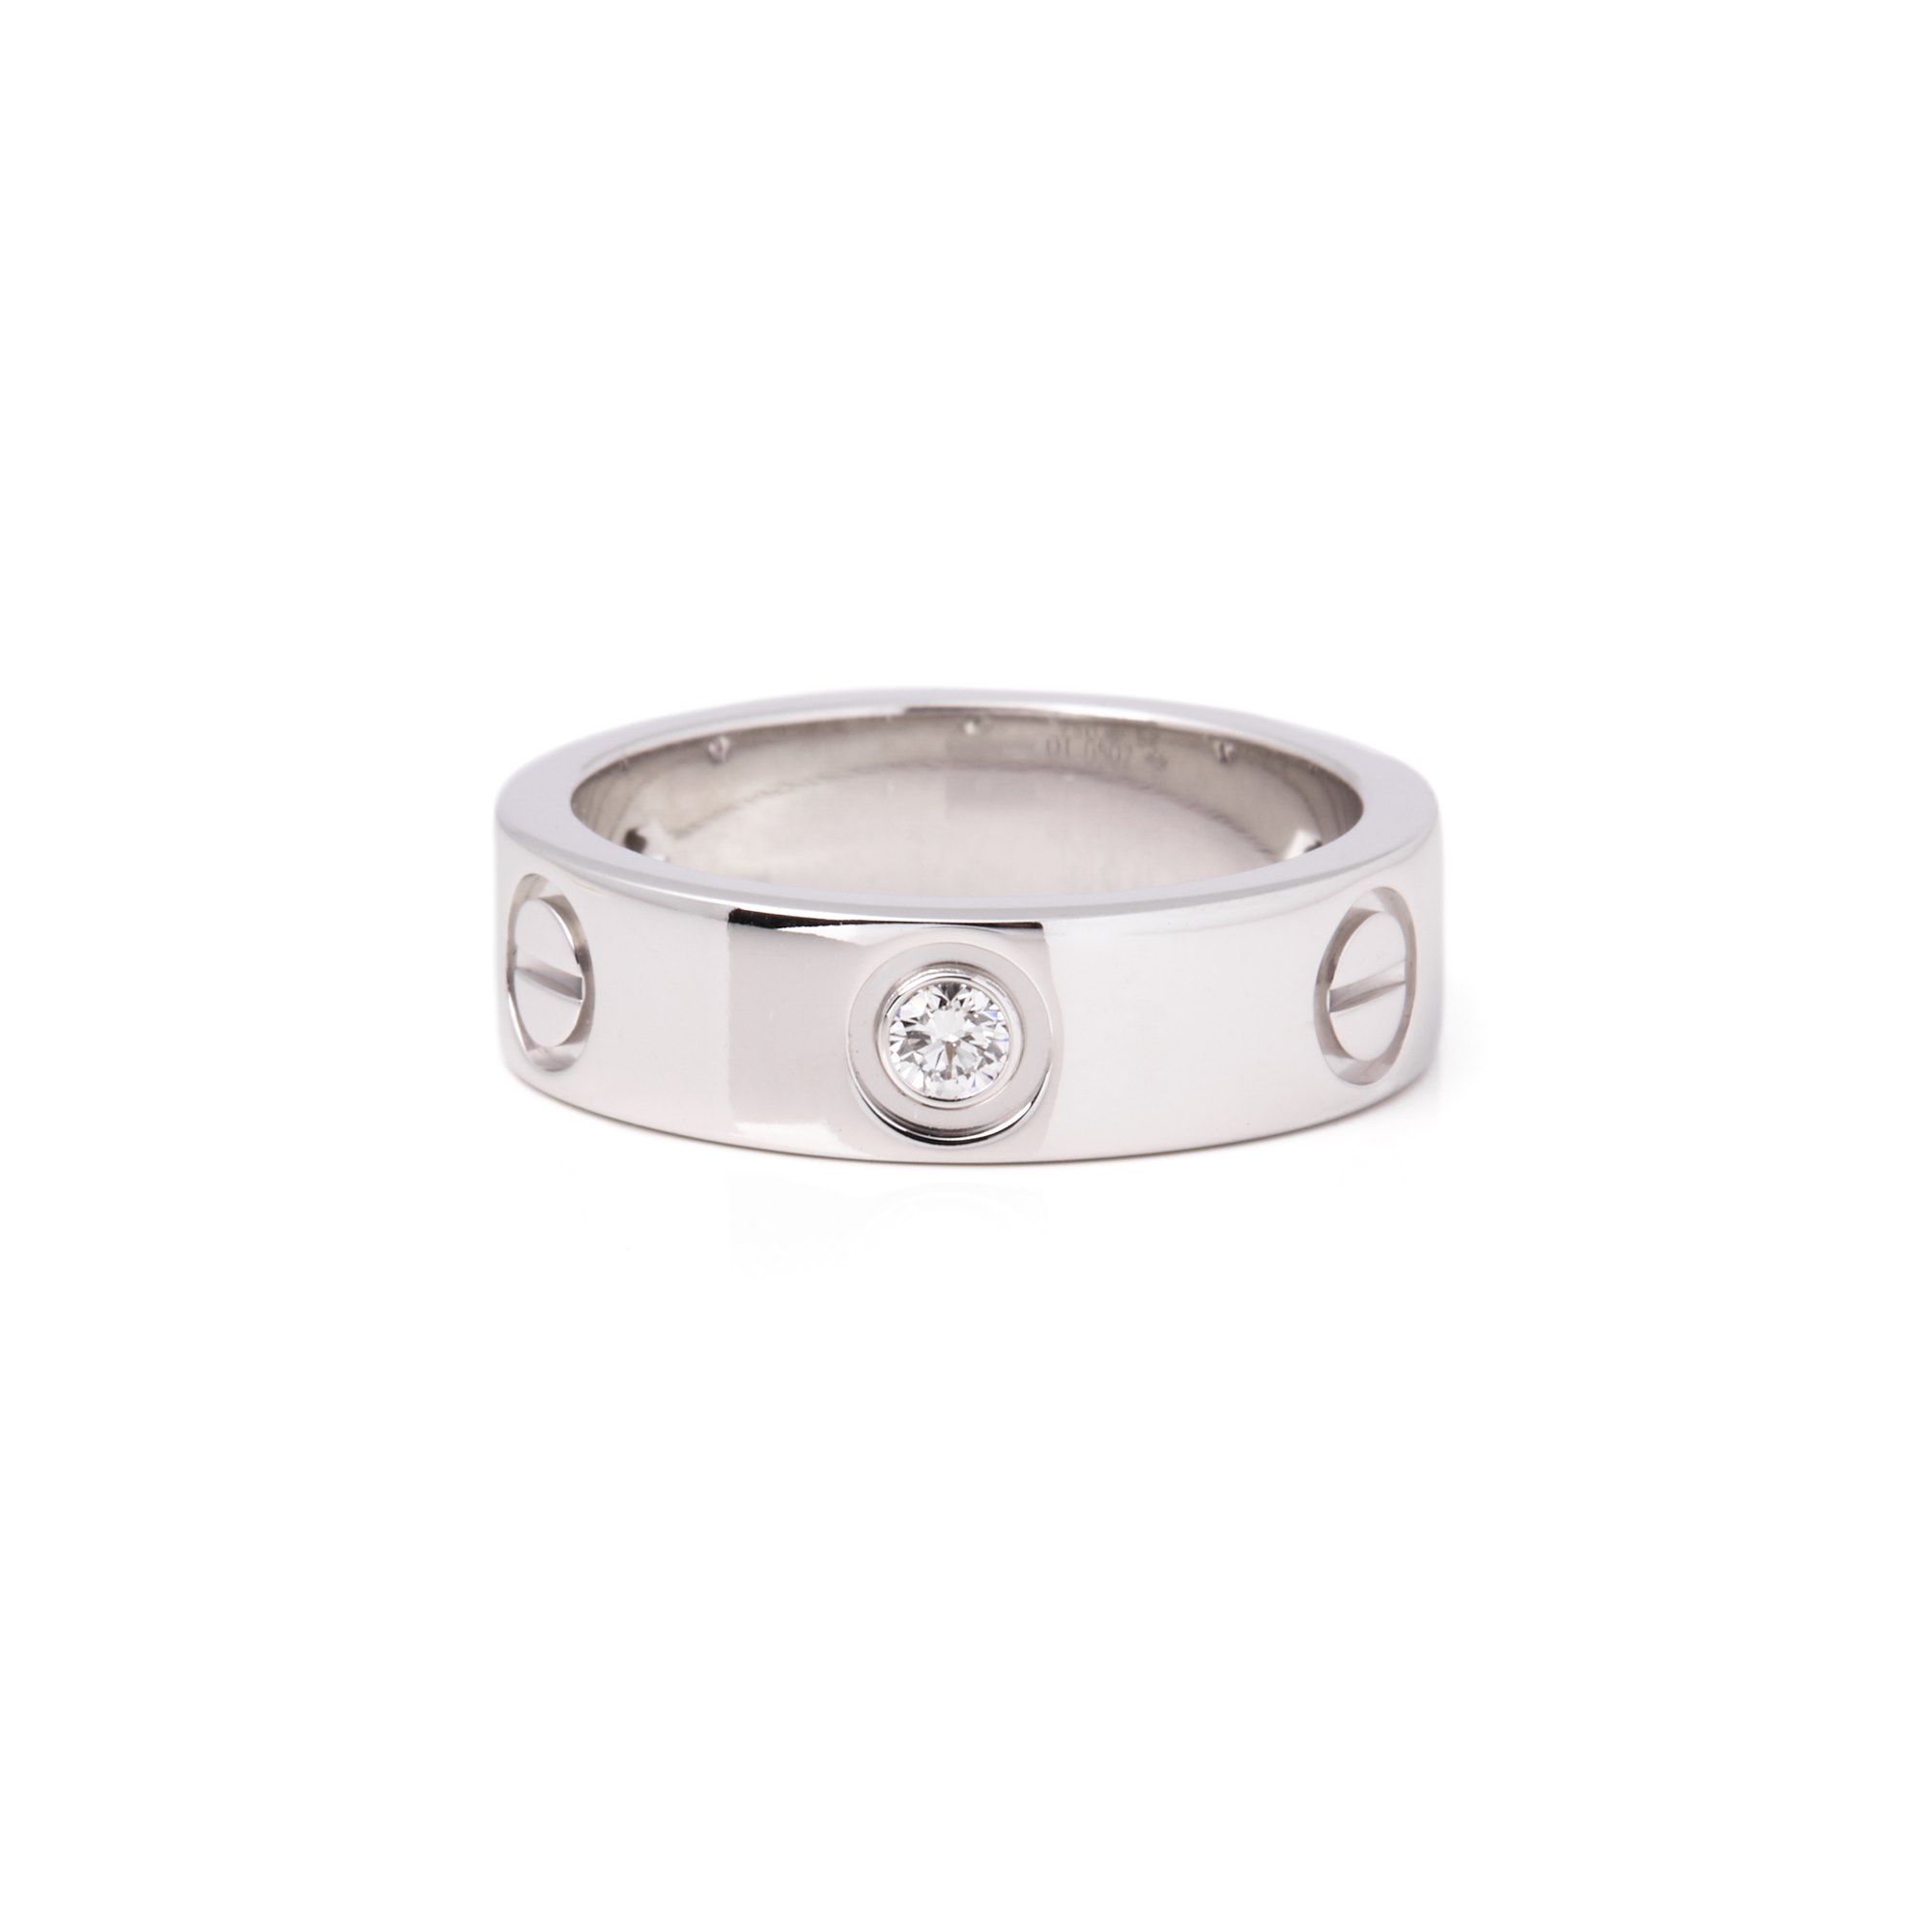 Cartier Love 18ct White Gold 3 Diamond Ring COMJ483 | Second Hand Jewellery